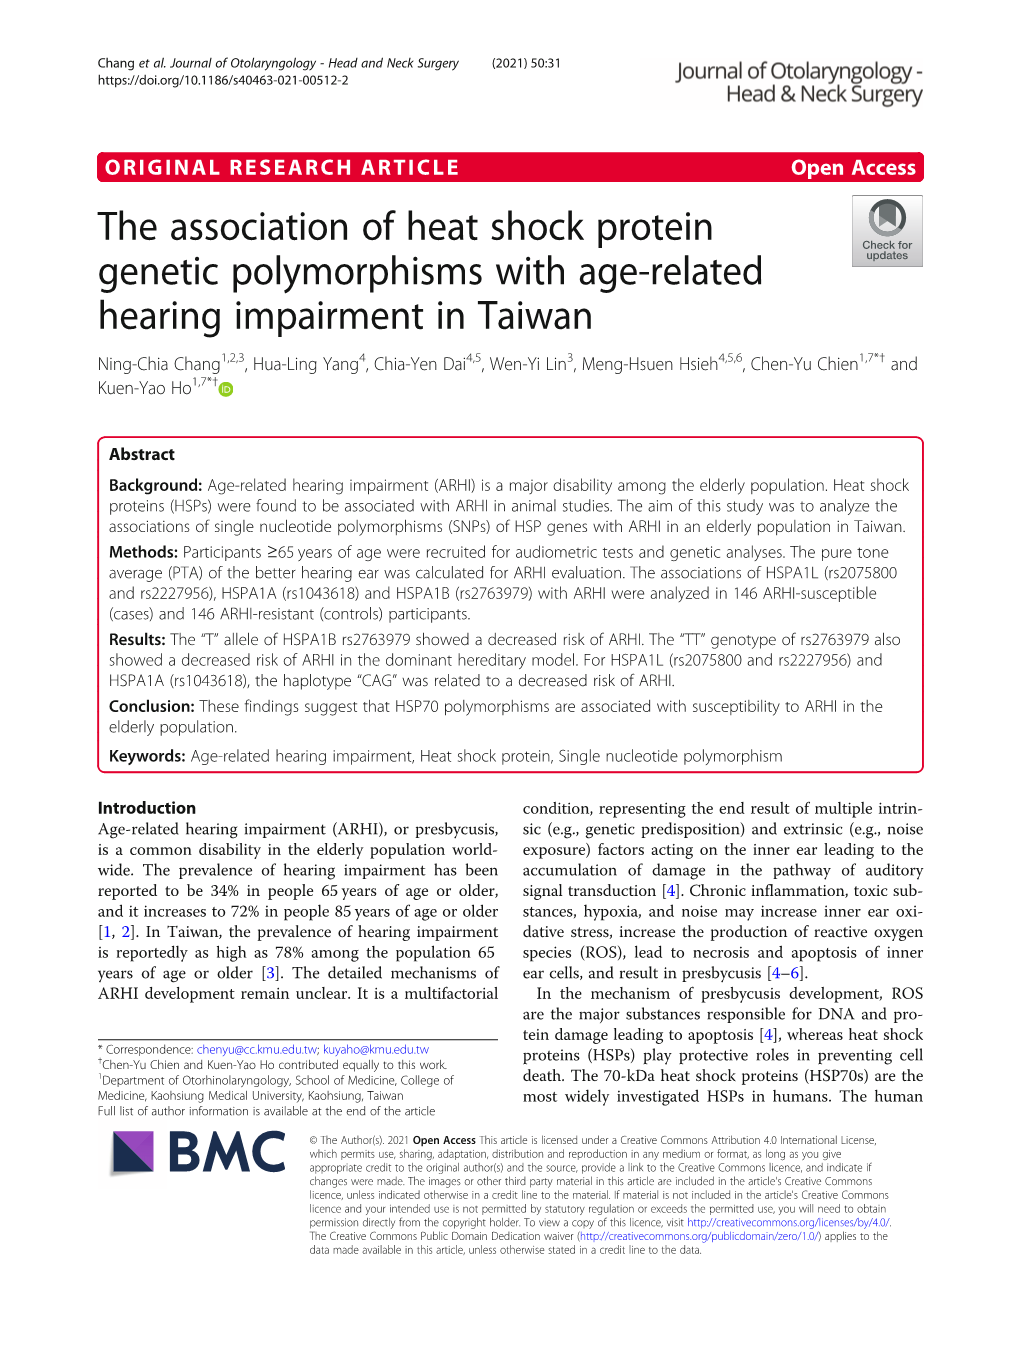 The Association of Heat Shock Protein Genetic Polymorphisms with Age